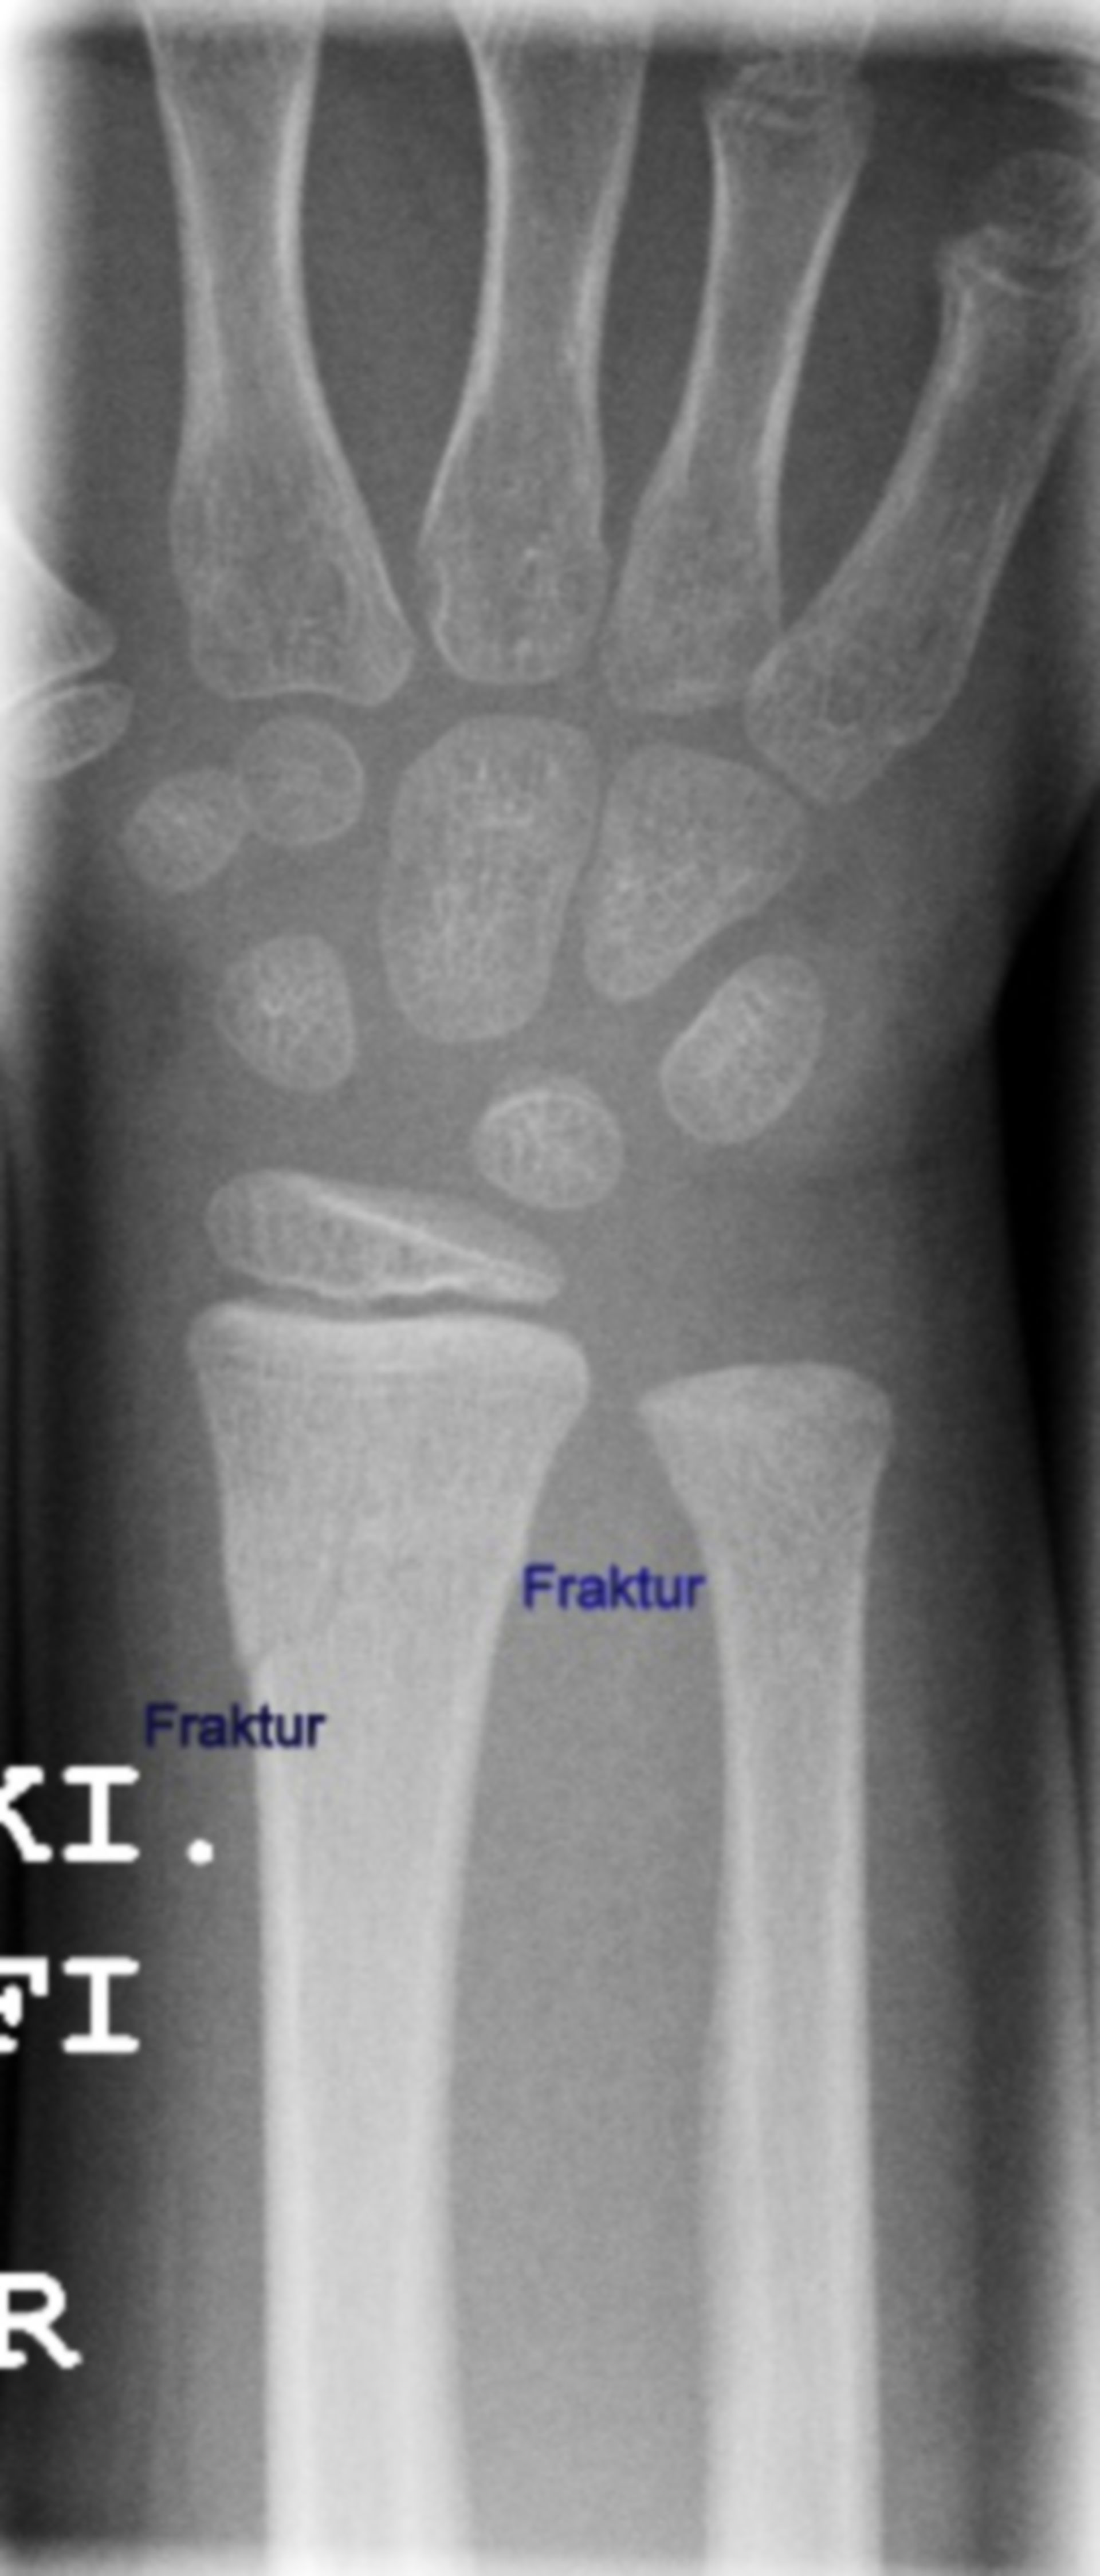 Greenstick fracture of the lower arm